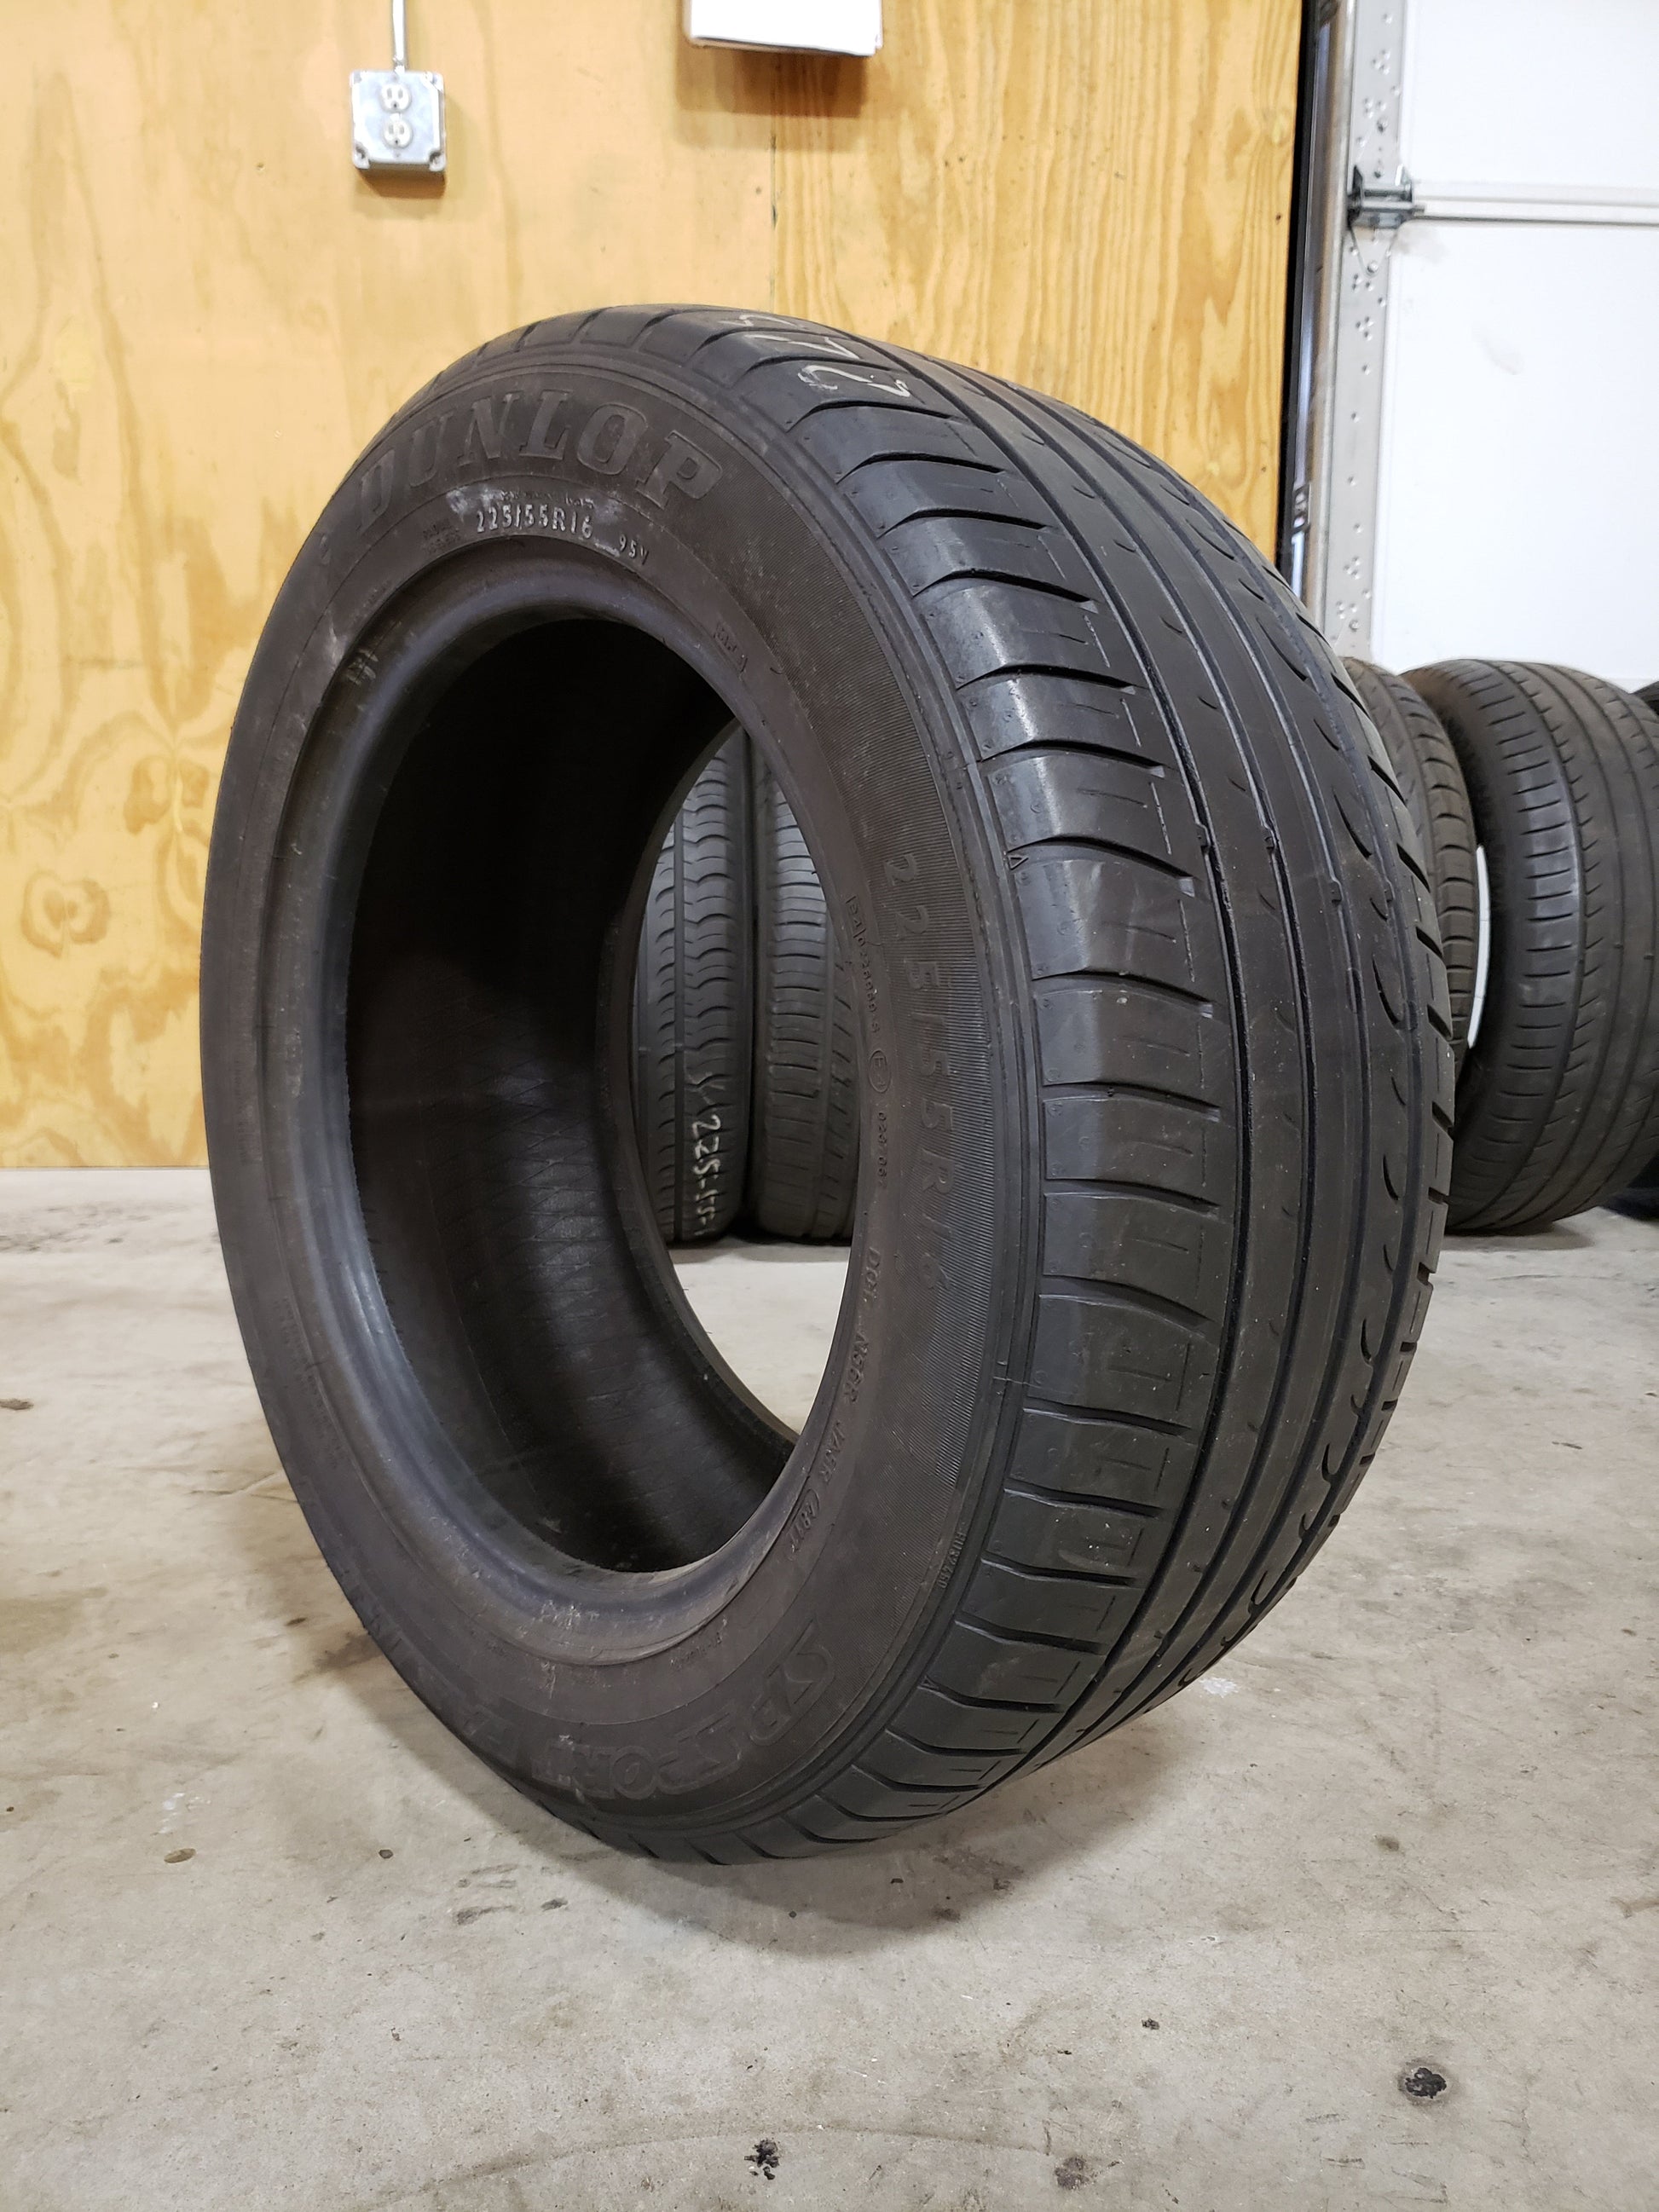 SINGLE 225/55R16 Dunlop SP Sport Fast Response 95V XL - Used Tires | – High  Tread Used Tires